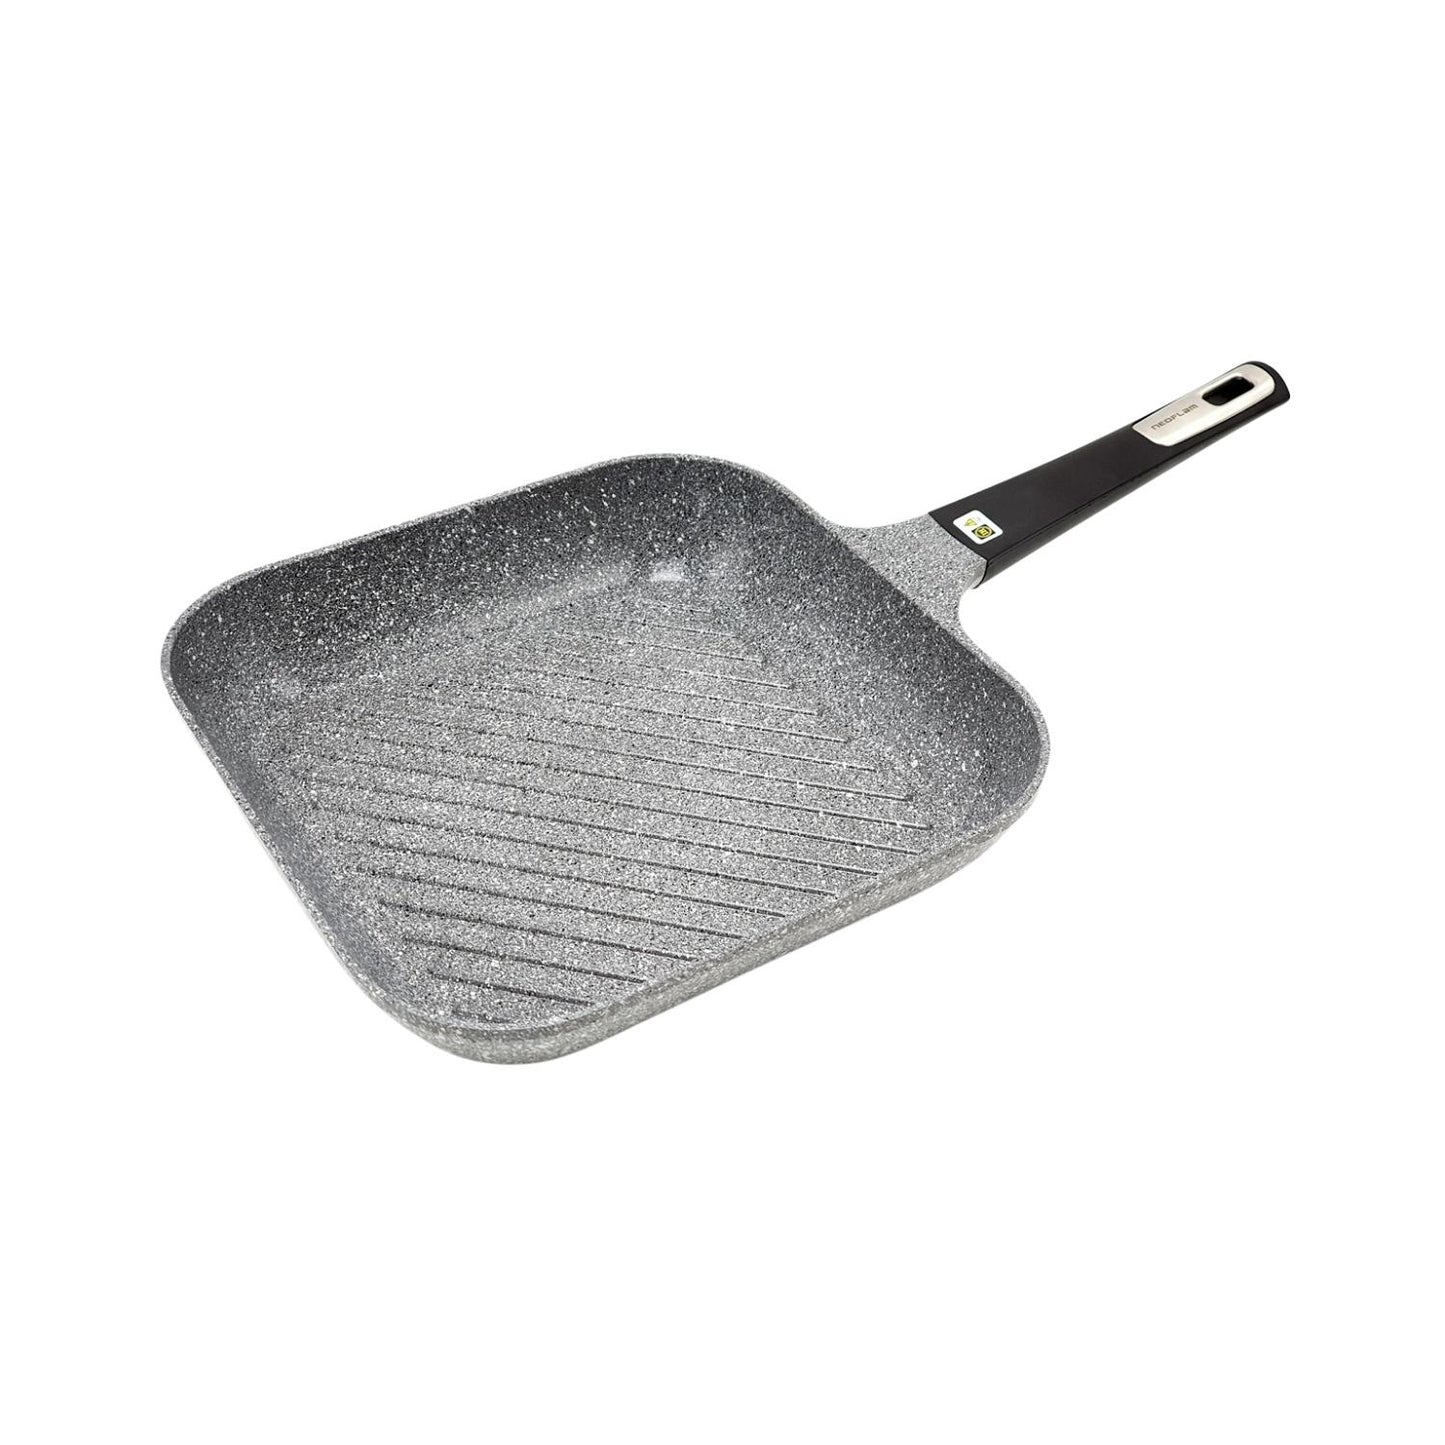 Neoflam Pote Grill Pan 28cm